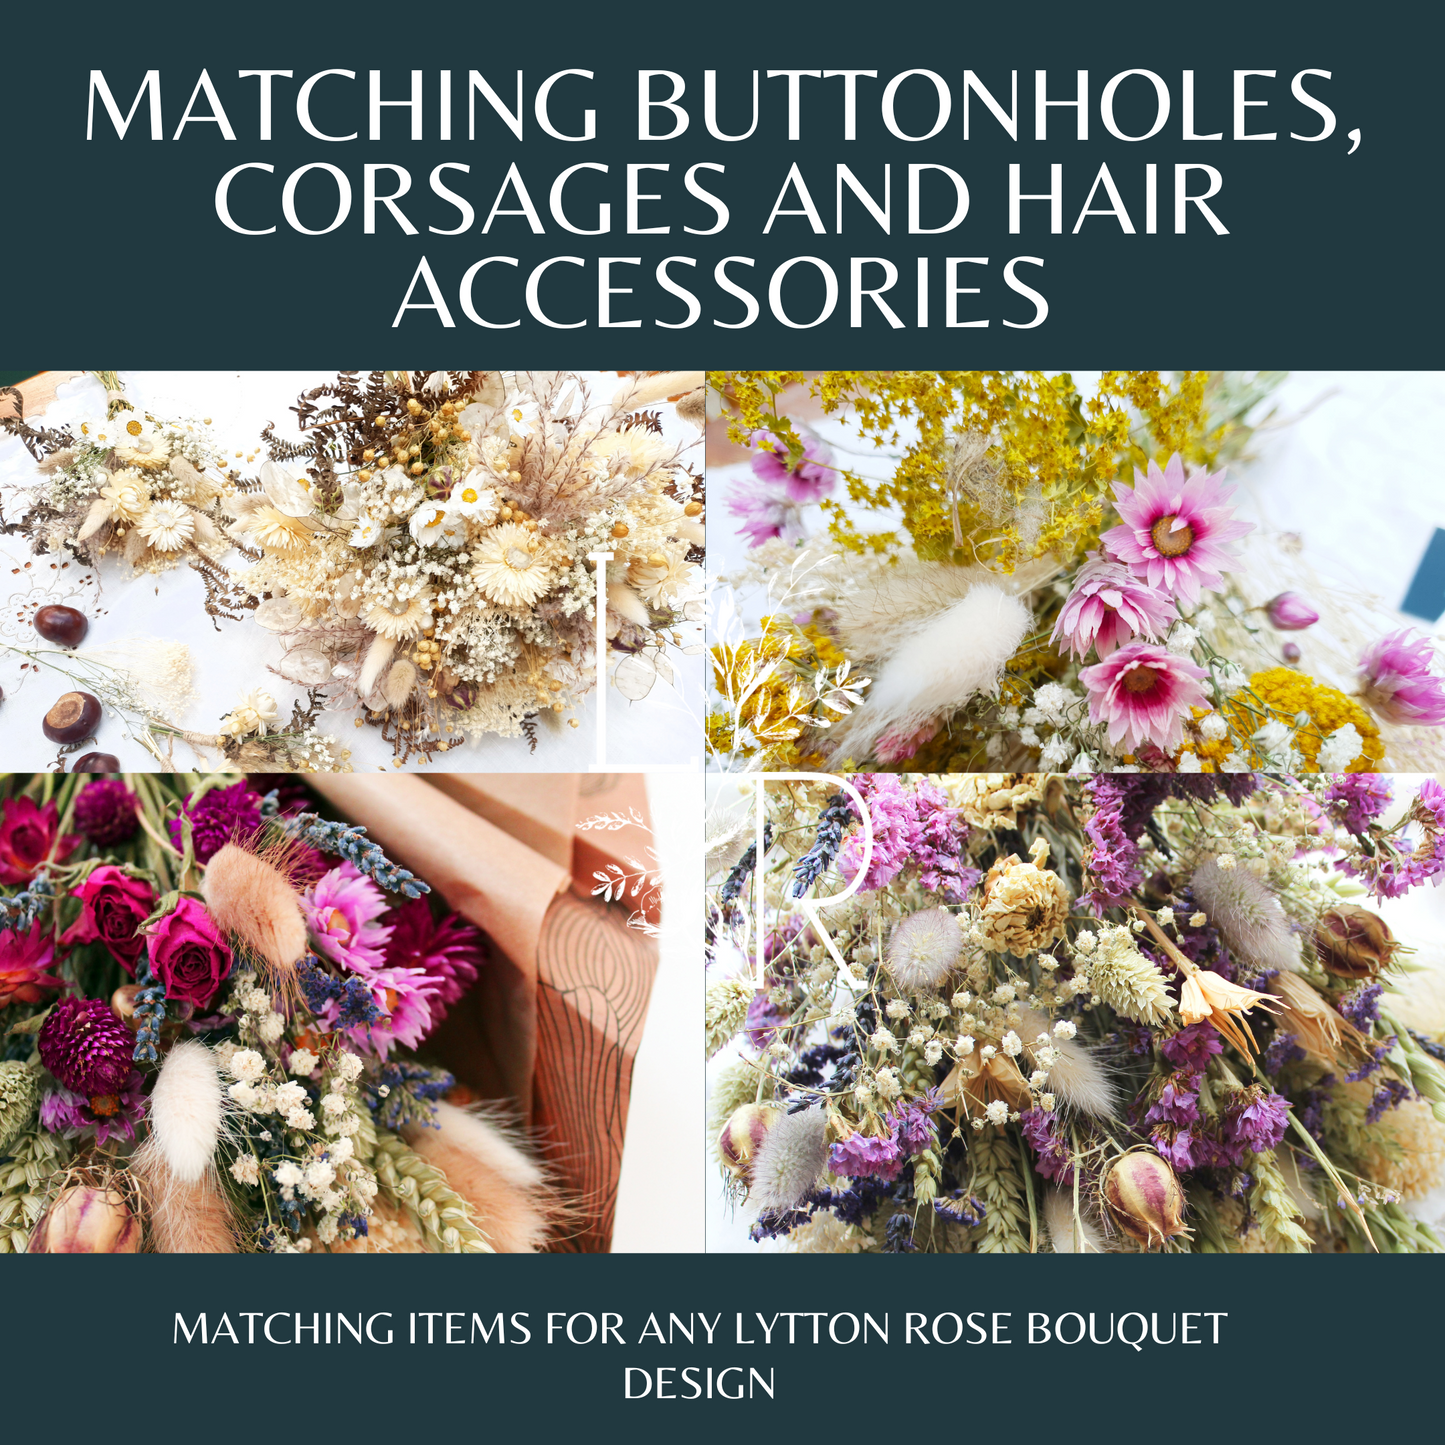 Matching Buttonholes, Corsages and Hair Accessories